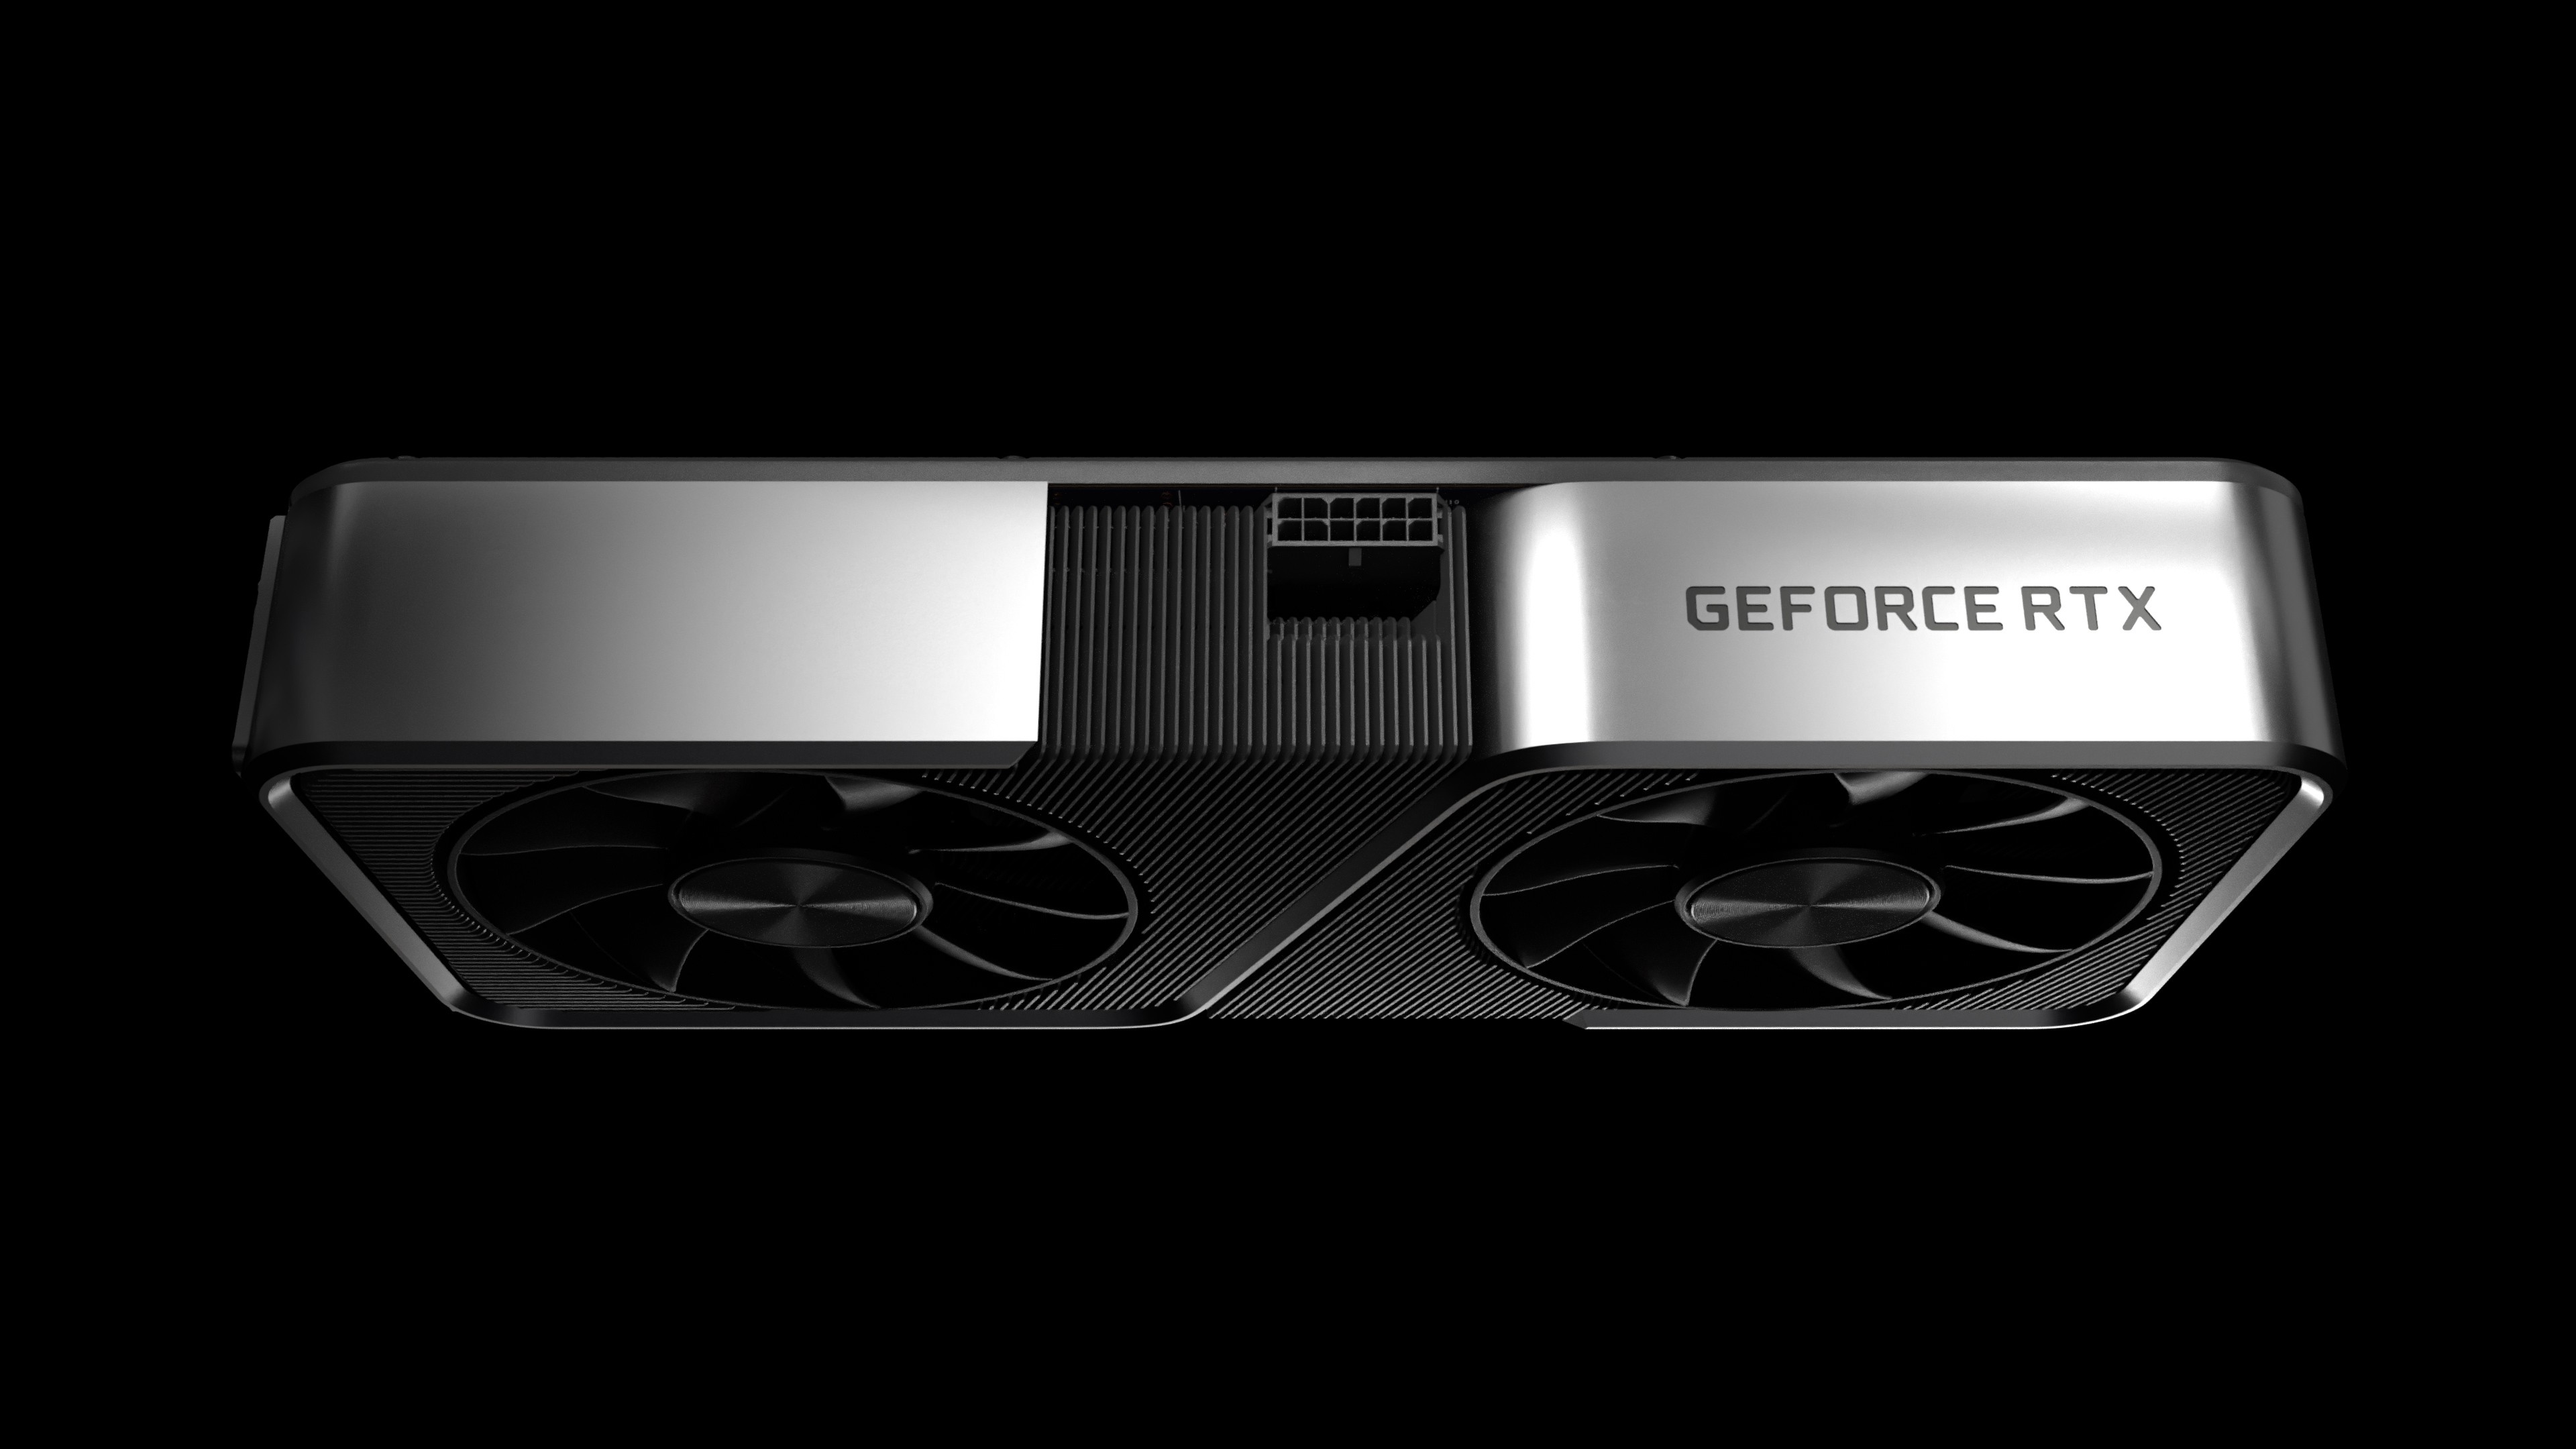 Nvidia RTX GeForce GPU Ray Tracing Chips Computer PC Gaming Founders Edition Series Graphics Card Te 3840x2160